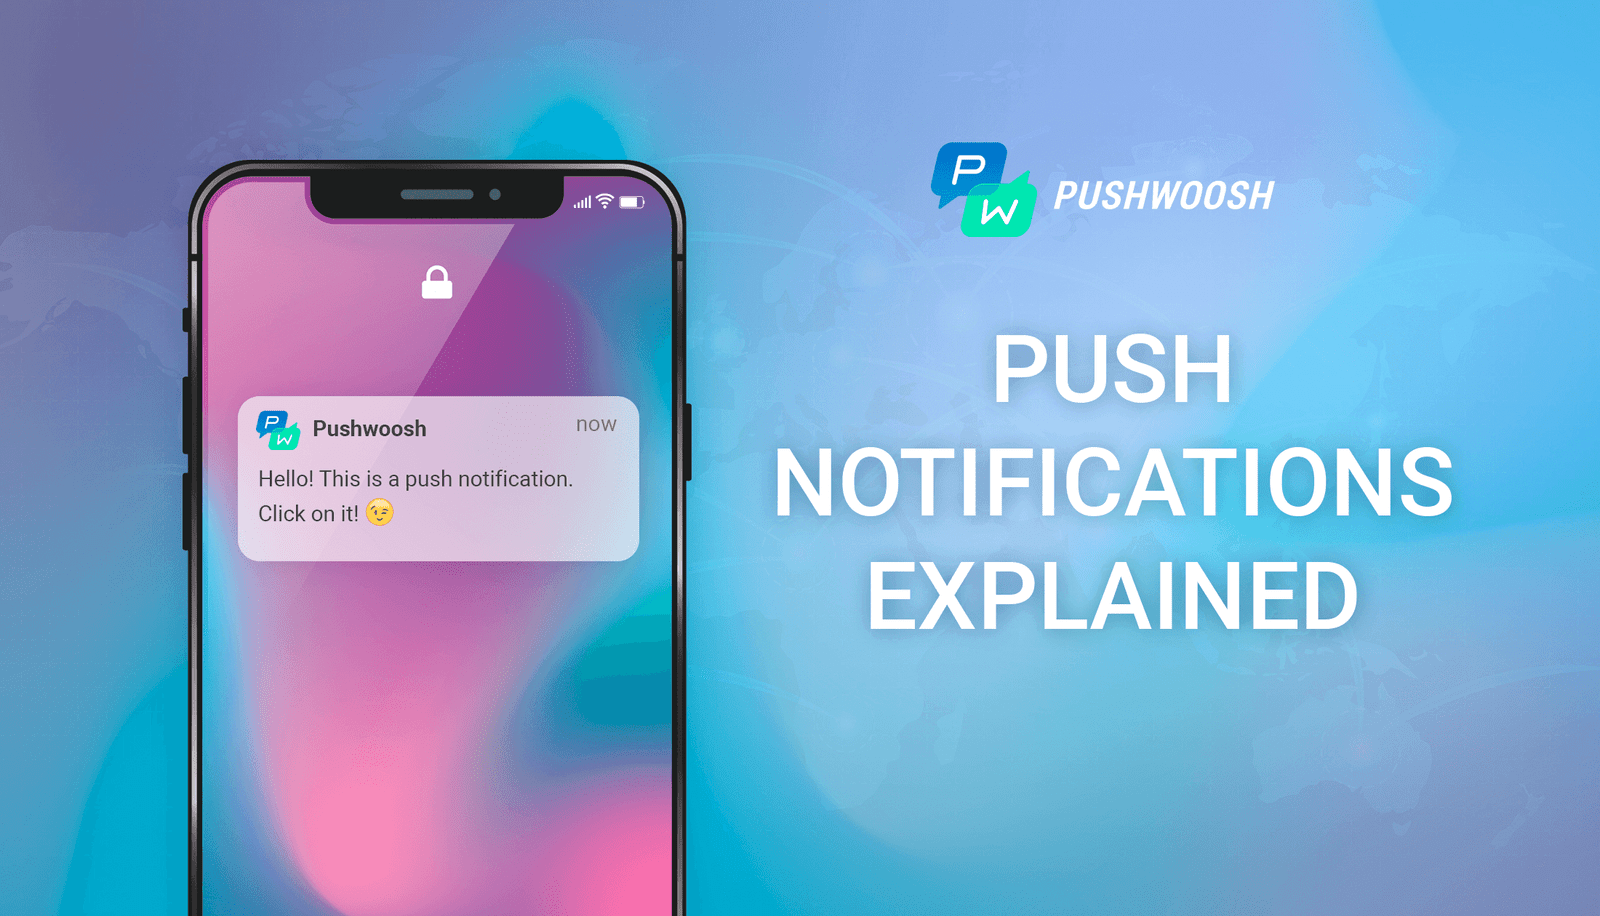 Push notifications. What are they and why should you use them?